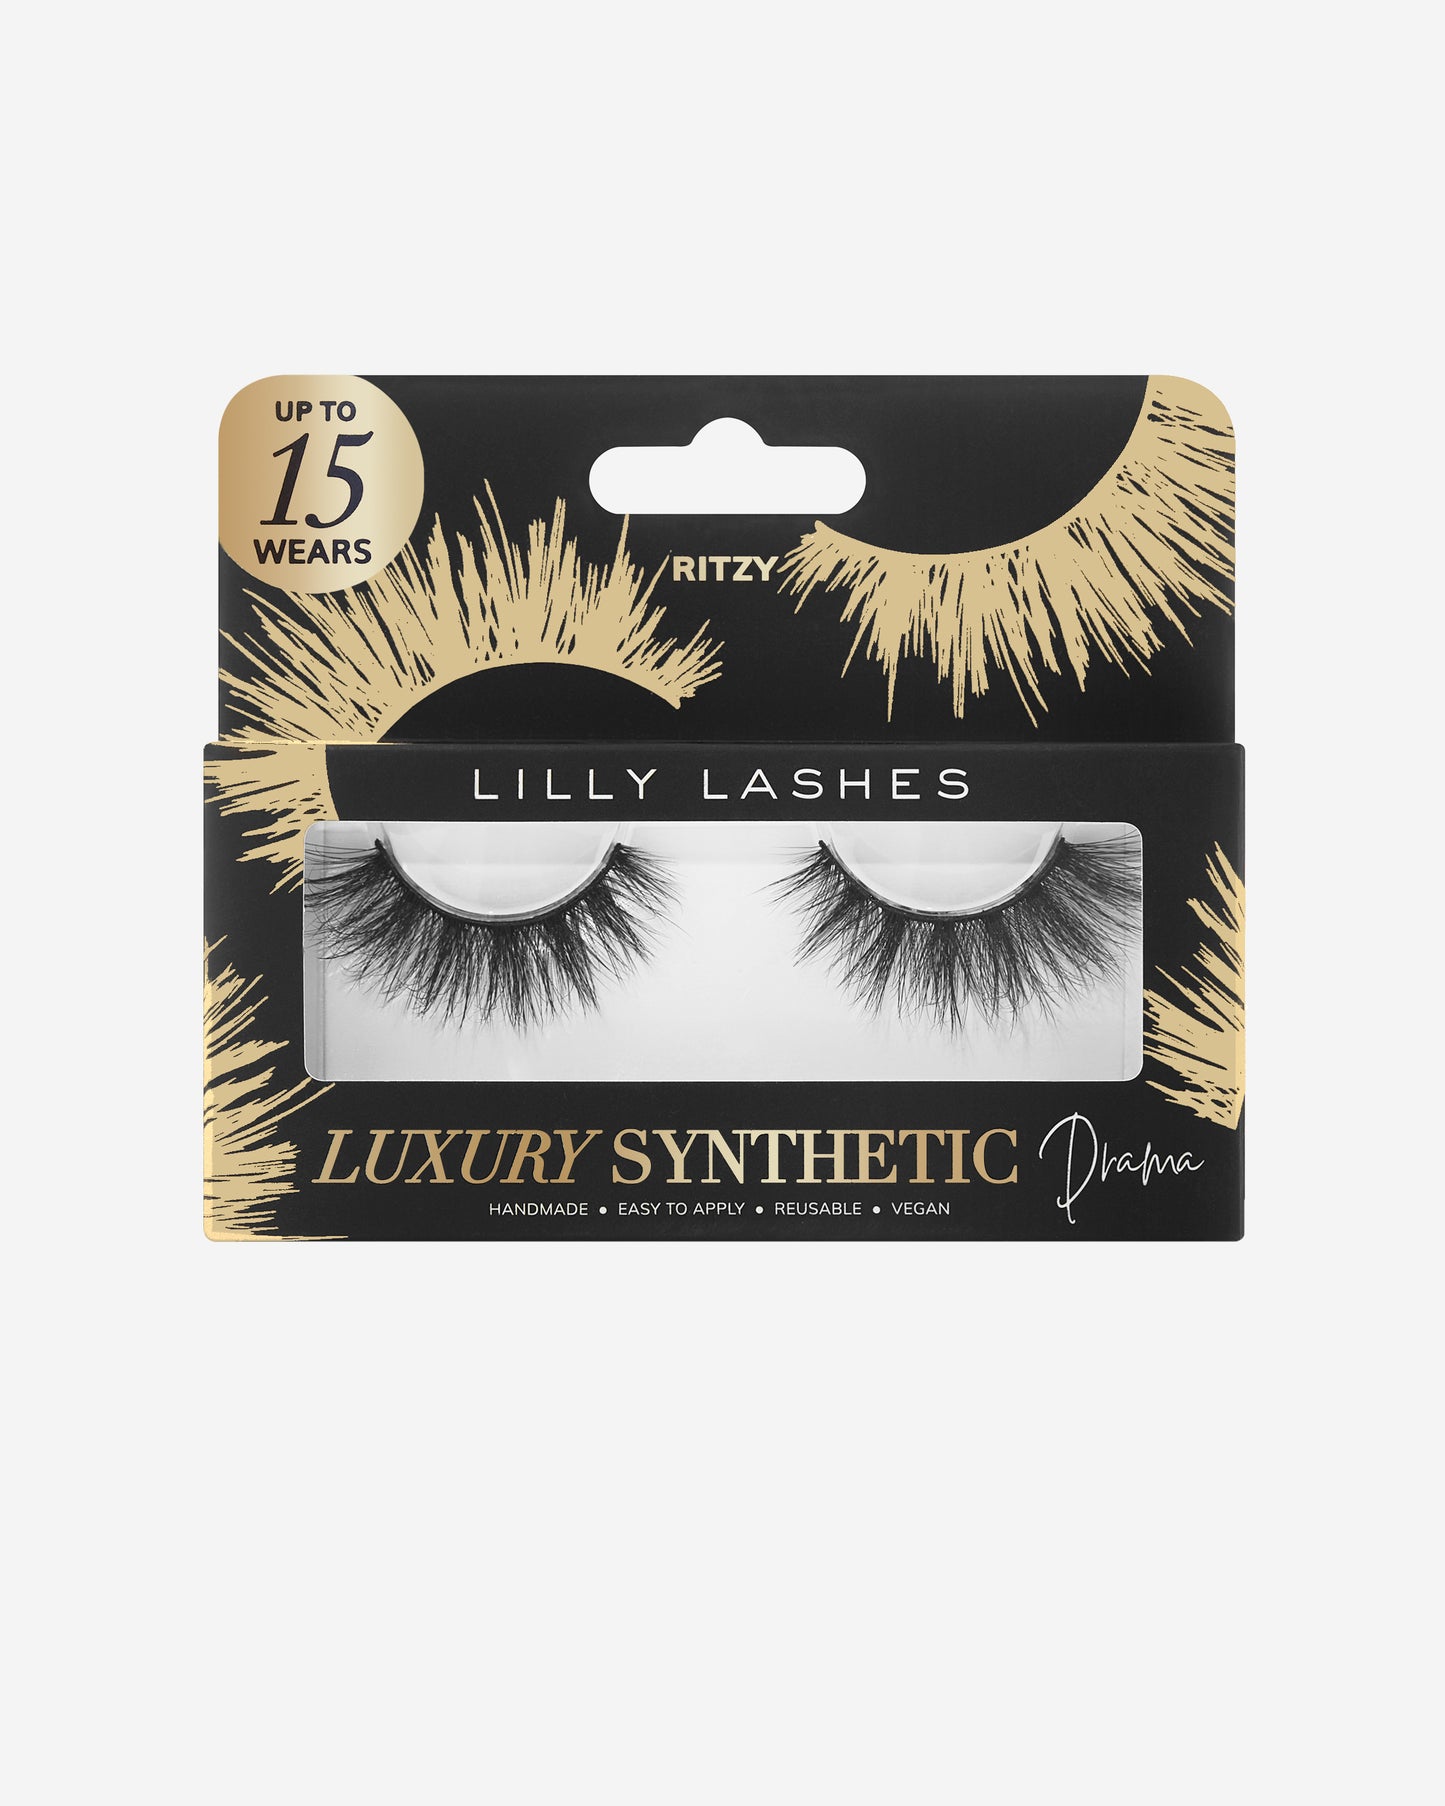 Lilly Lashes | LS Drama | Ritzy | Front of Box